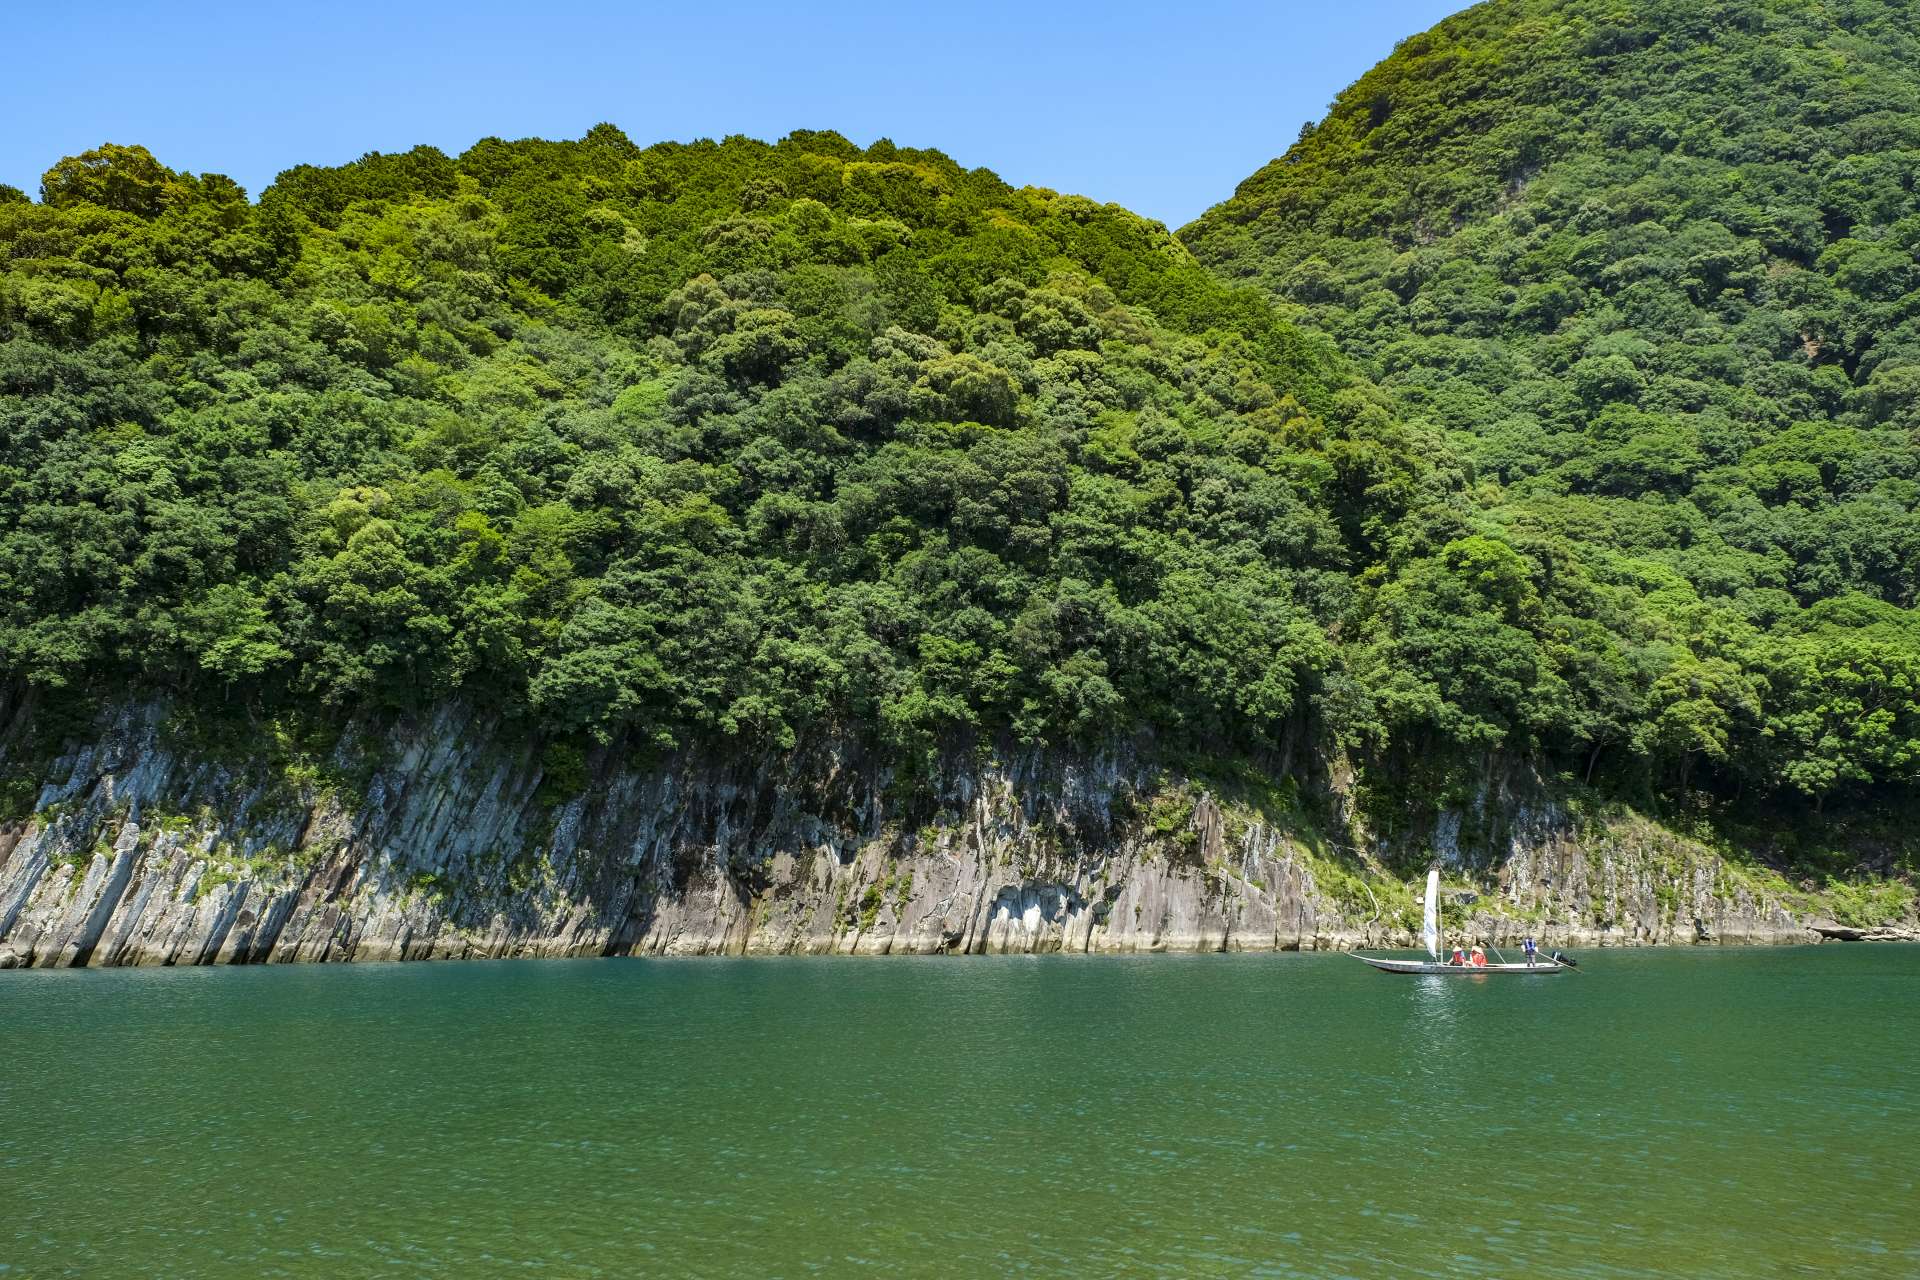 Kumano River Bout Tour on a Traditional Wooden Boat